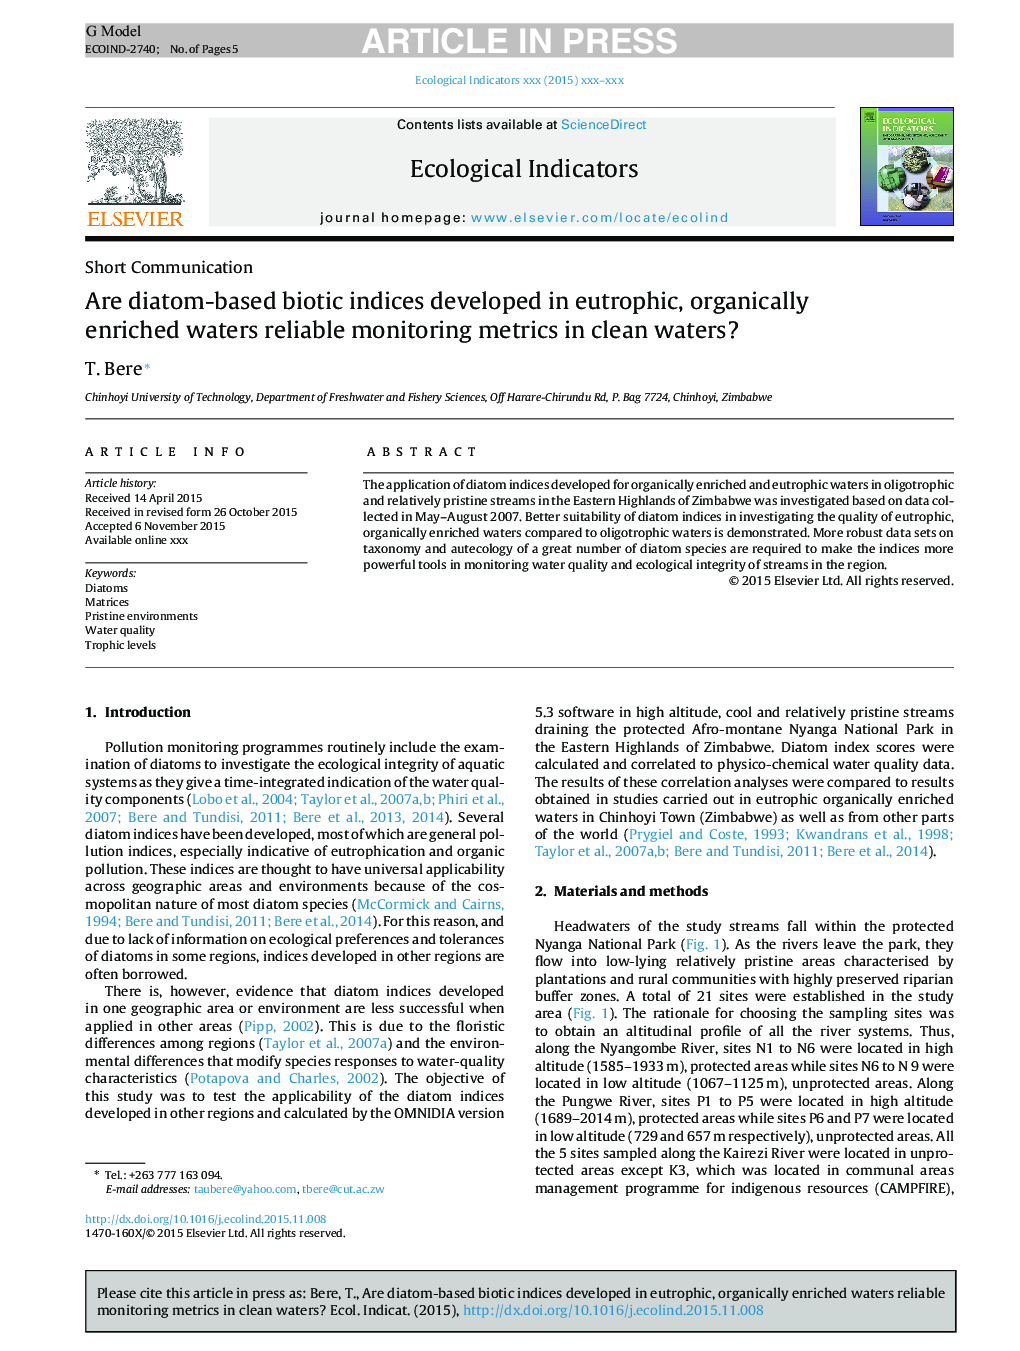 Are diatom-based biotic indices developed in eutrophic, organically enriched waters reliable monitoring metrics in clean waters?